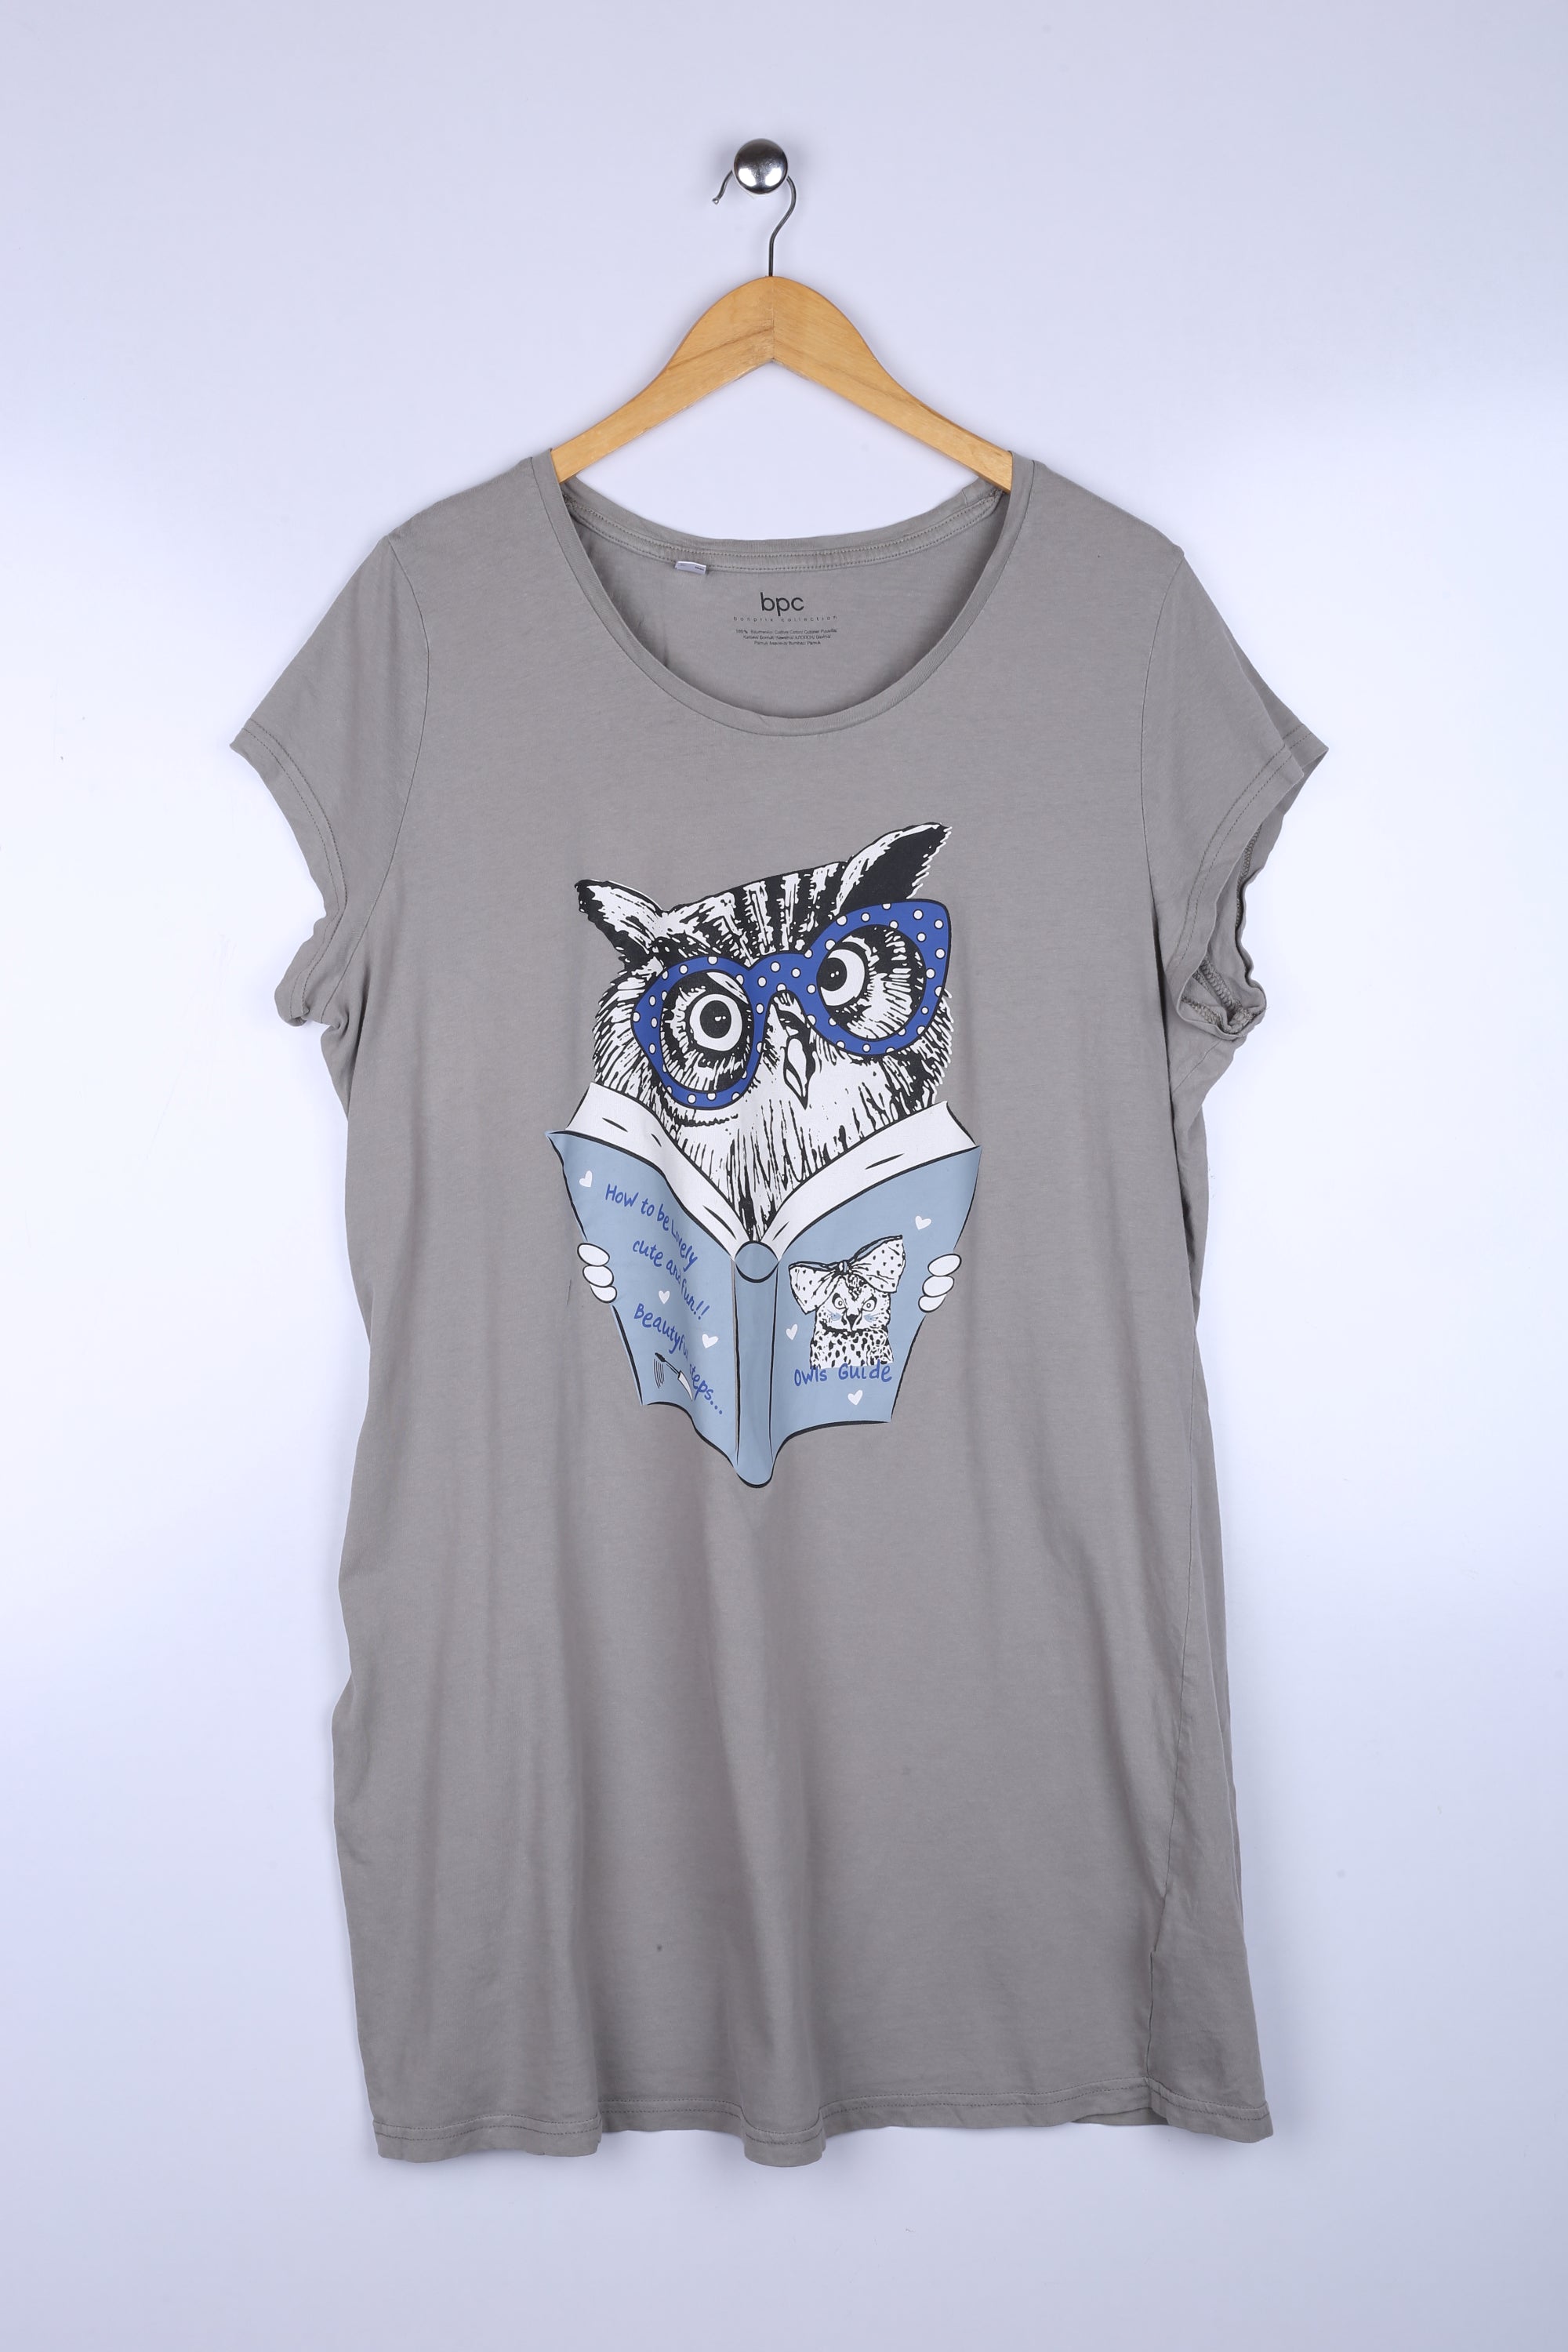 Vintage Owls Guide Graphic Tee Grey